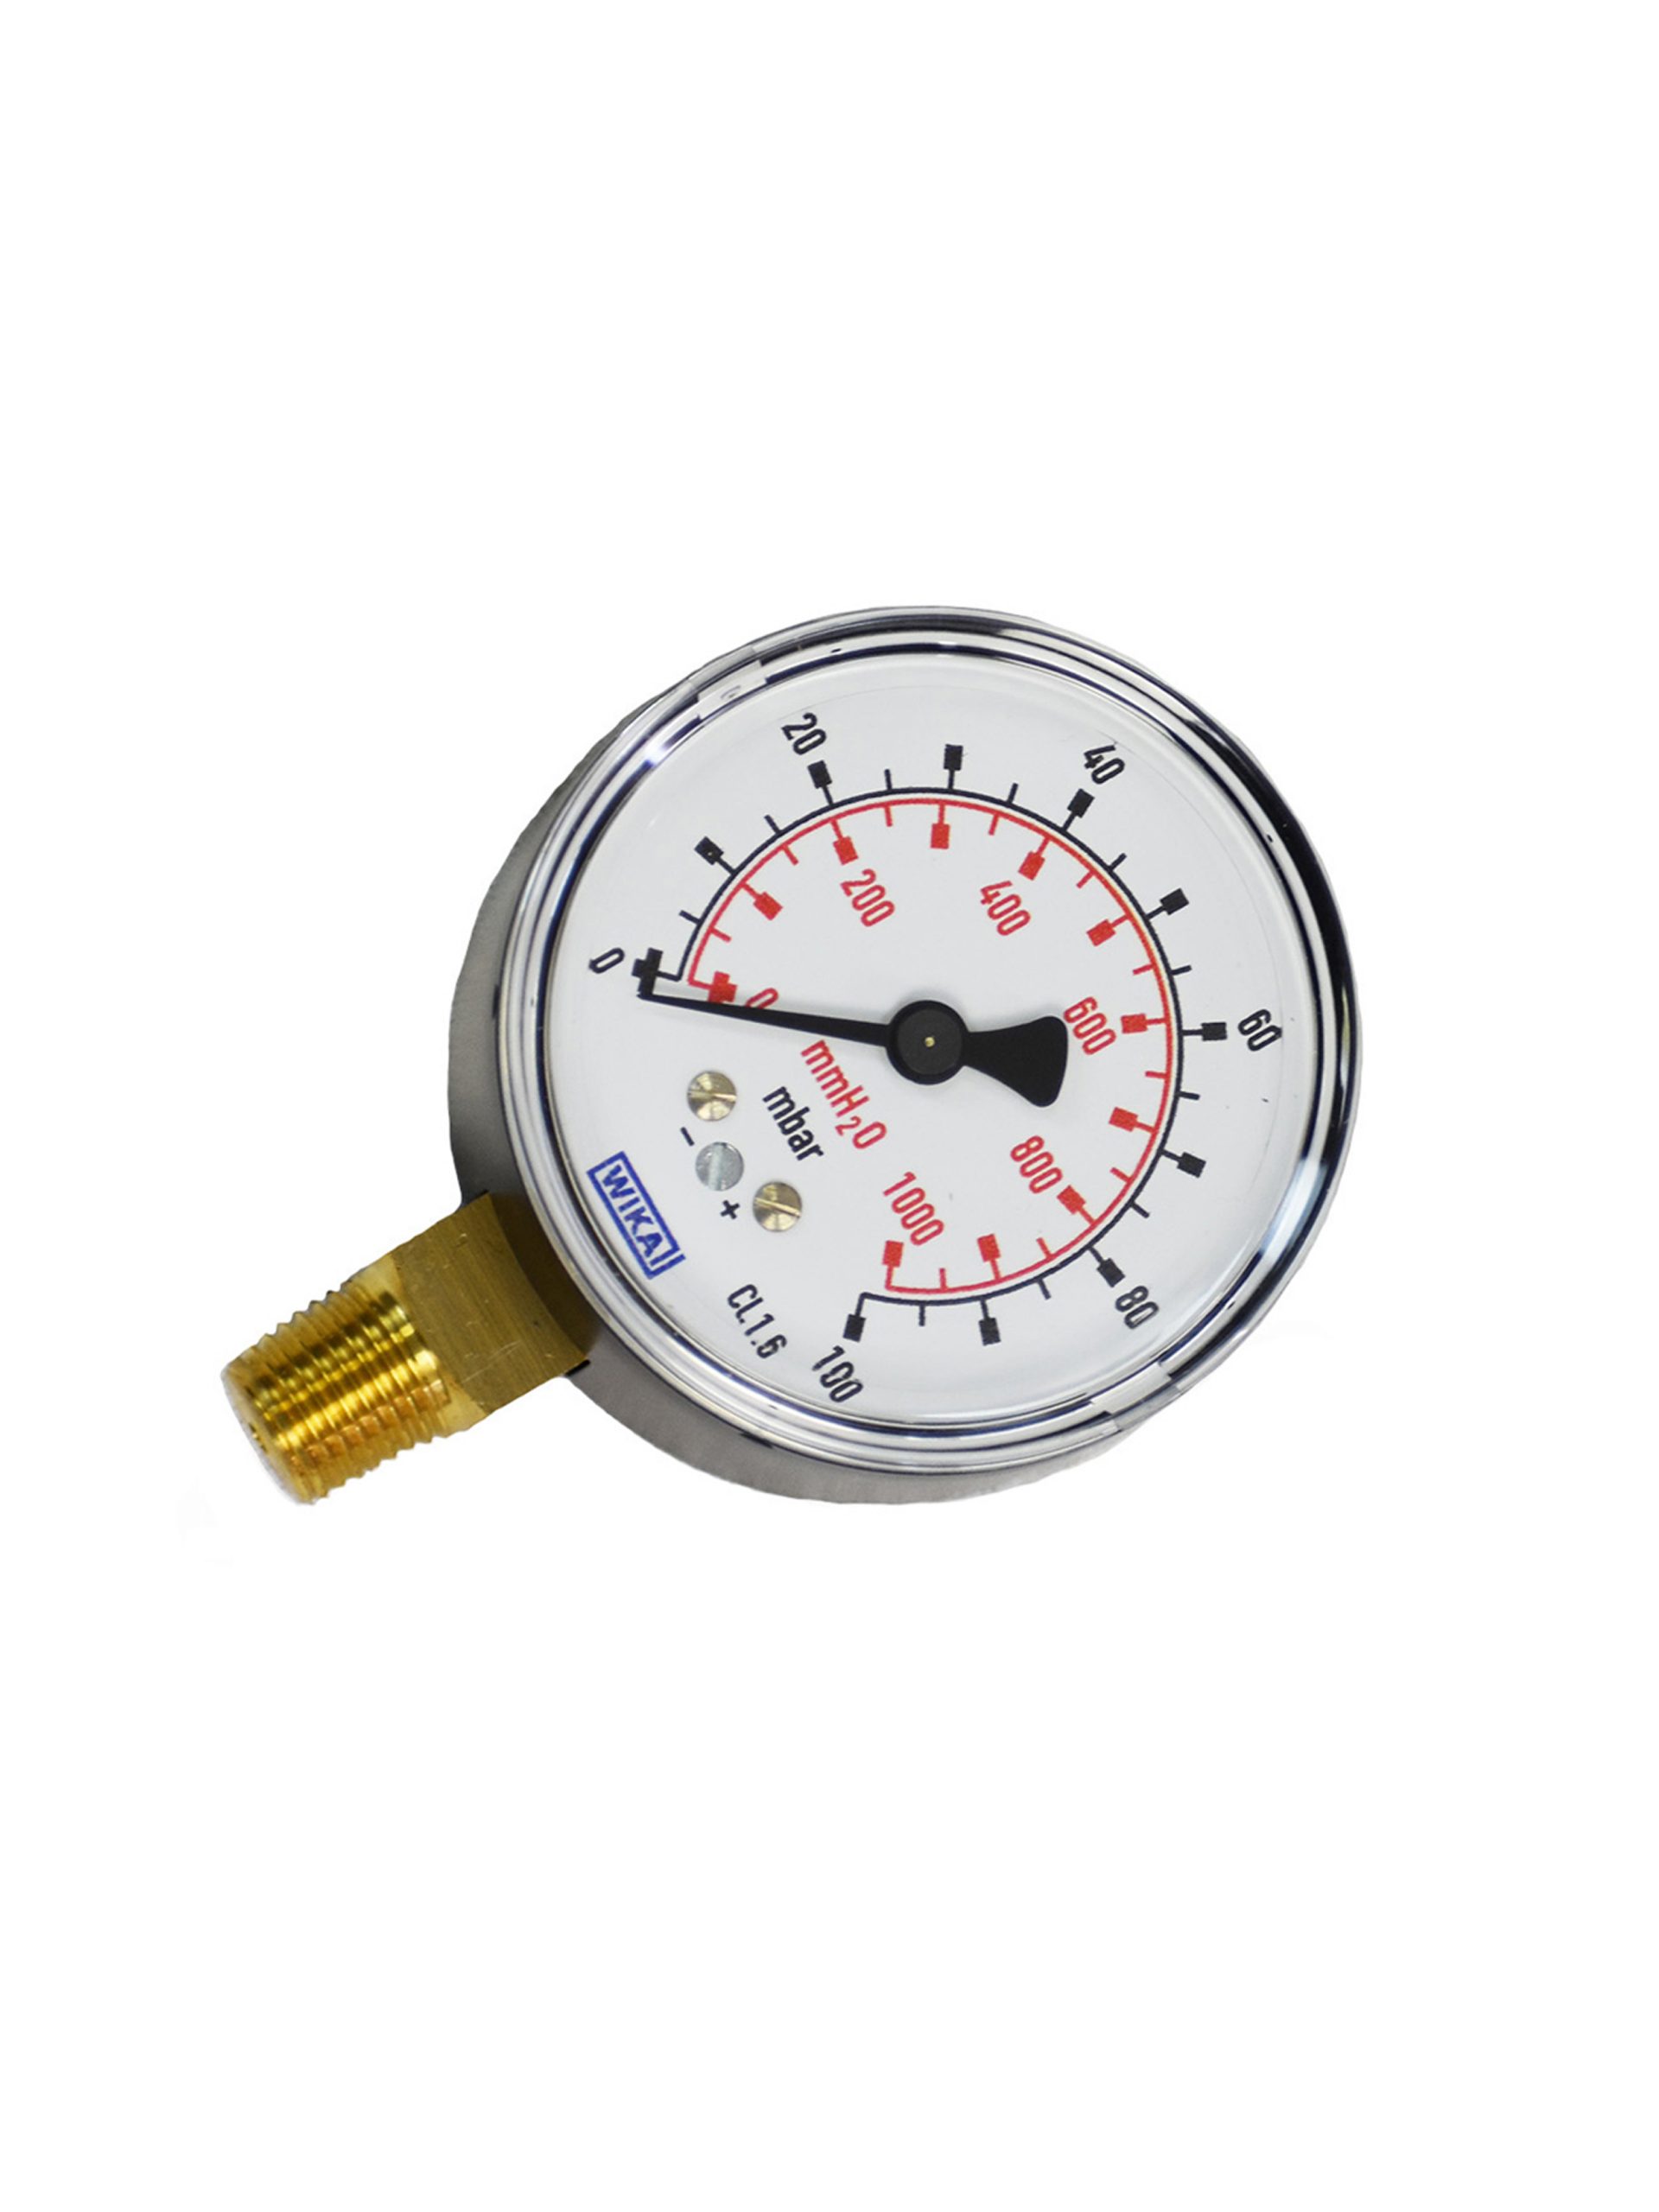 PRESSURE GAUGE  0-100 MBAR ,  DIAMETER 2 1/2 Inches  CONNECTION 1/4 Inches , WIKA from Gas Equipment Company Llc Abu Dhabi, UNITED ARAB EMIRATES